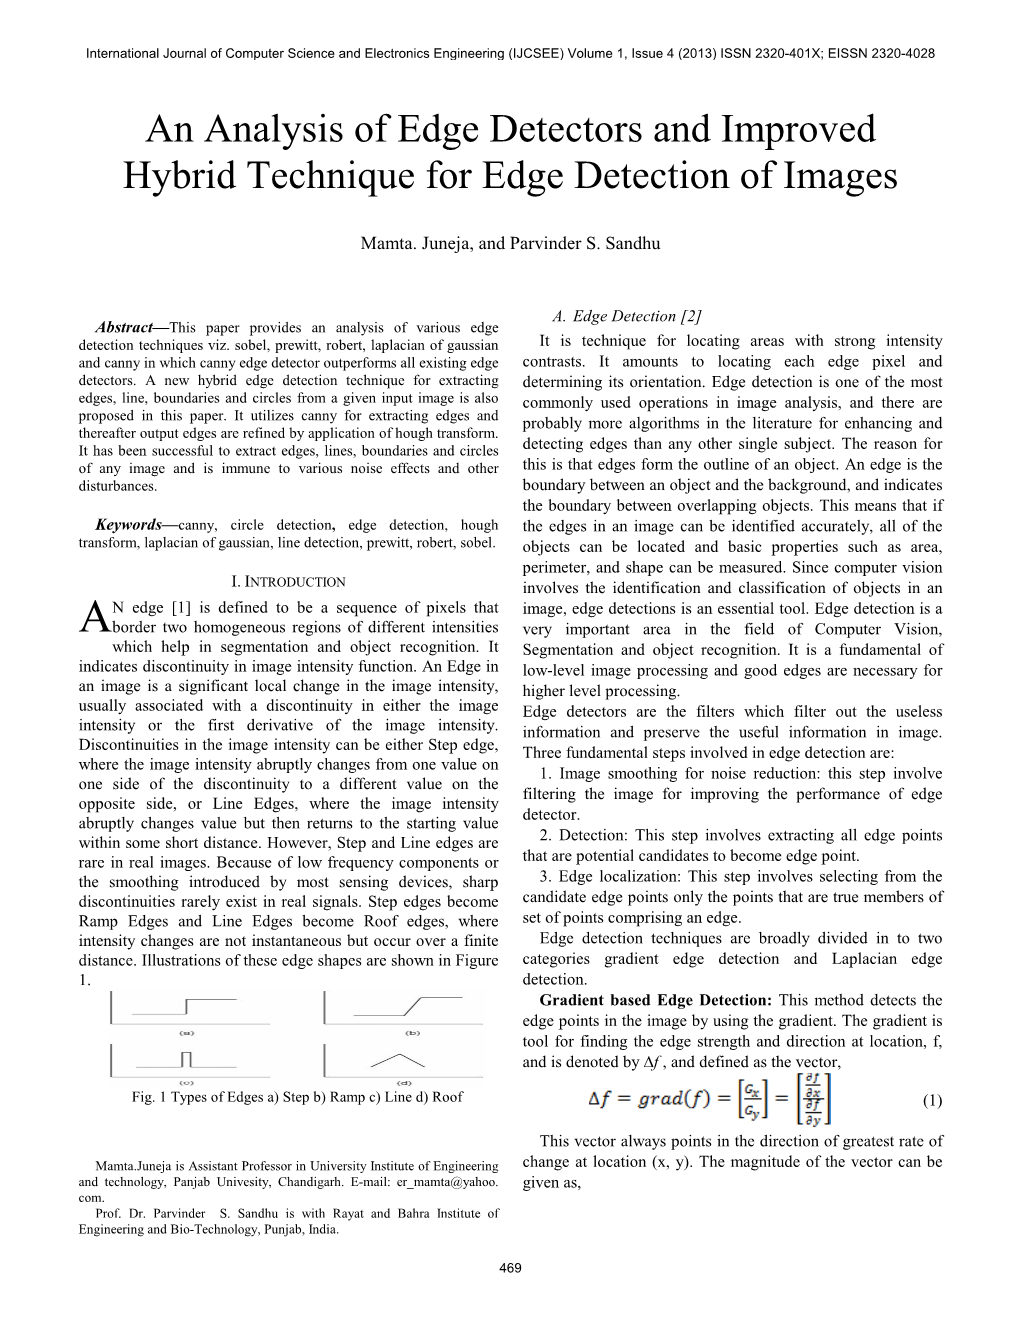 An Analysis of Edge Detectors and Improved Hybrid Technique for Edge Detection of Images